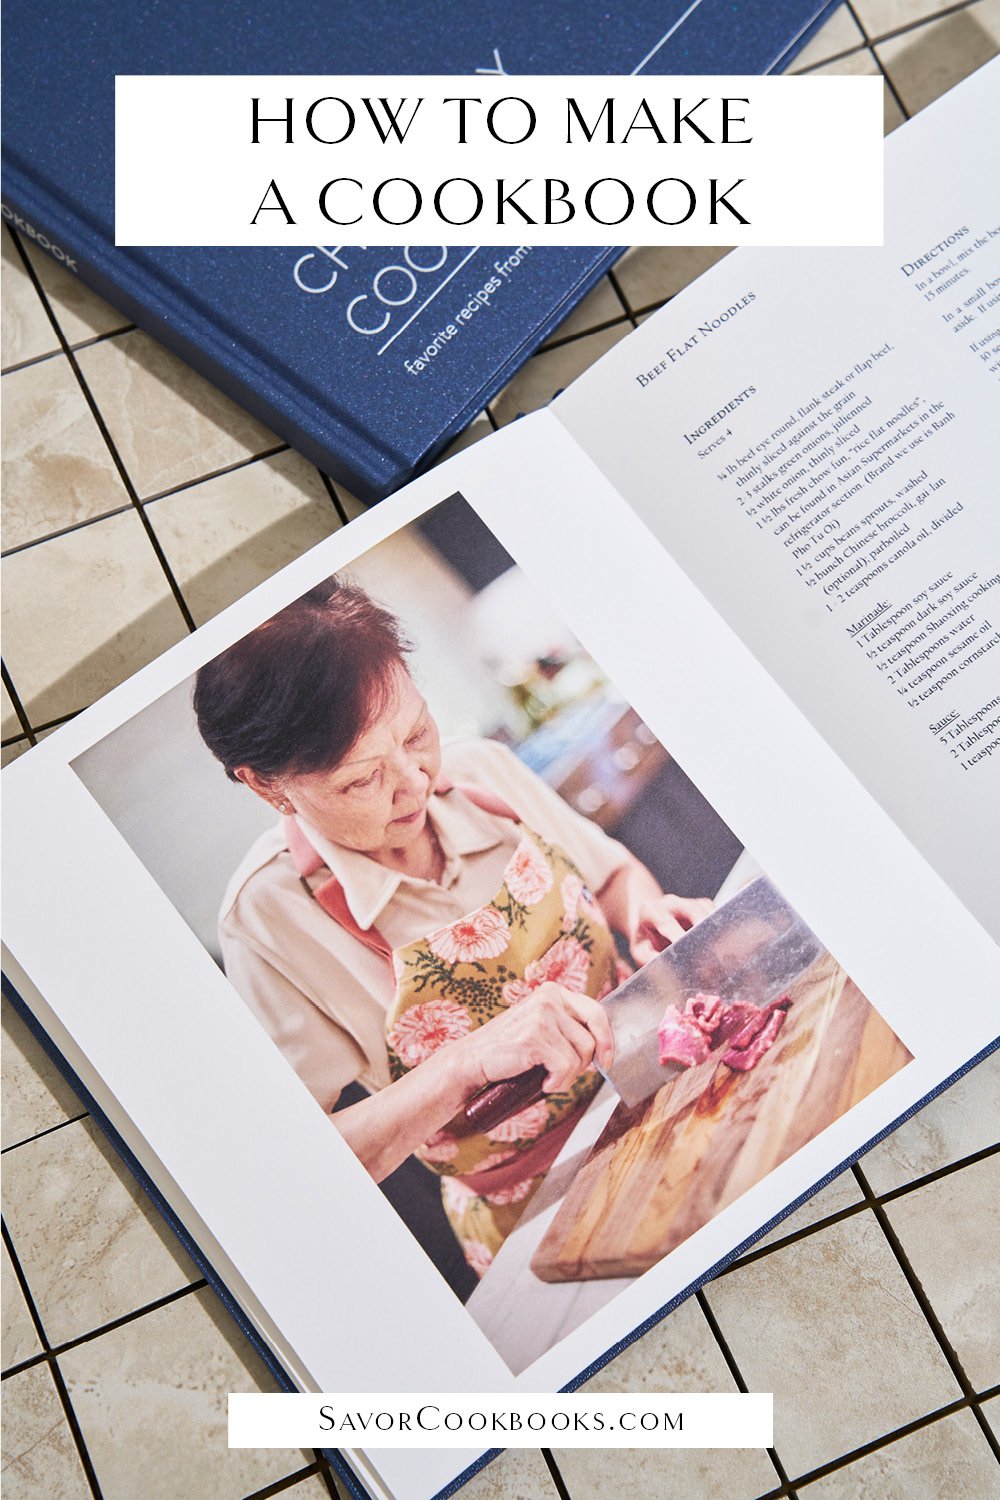 Create Your Own Cookbook: Expert Tips for Crafting Personalized Recipes